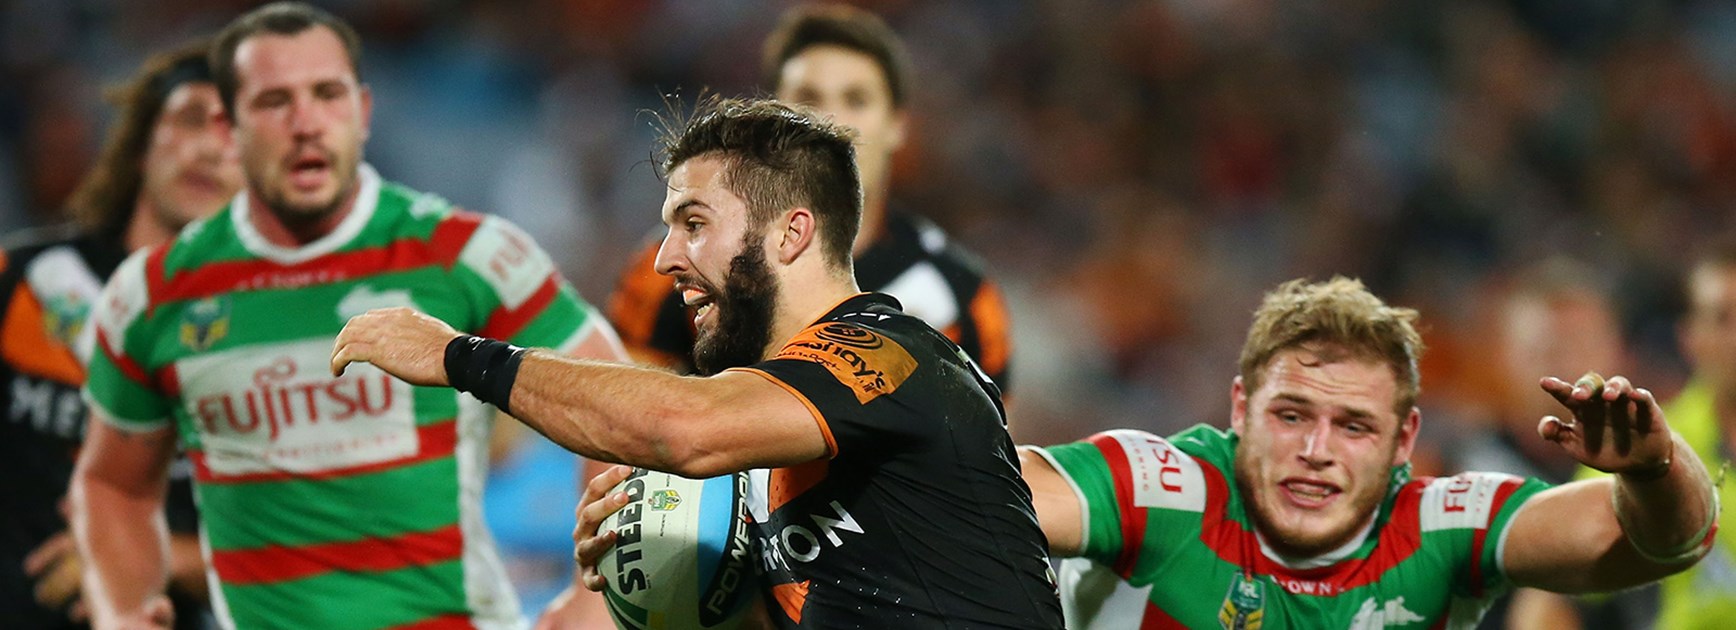 Wests Tigers fullback James Tedesco in action against the Rabbitohs in Round 14 of the 2015 Telstra Premiership.